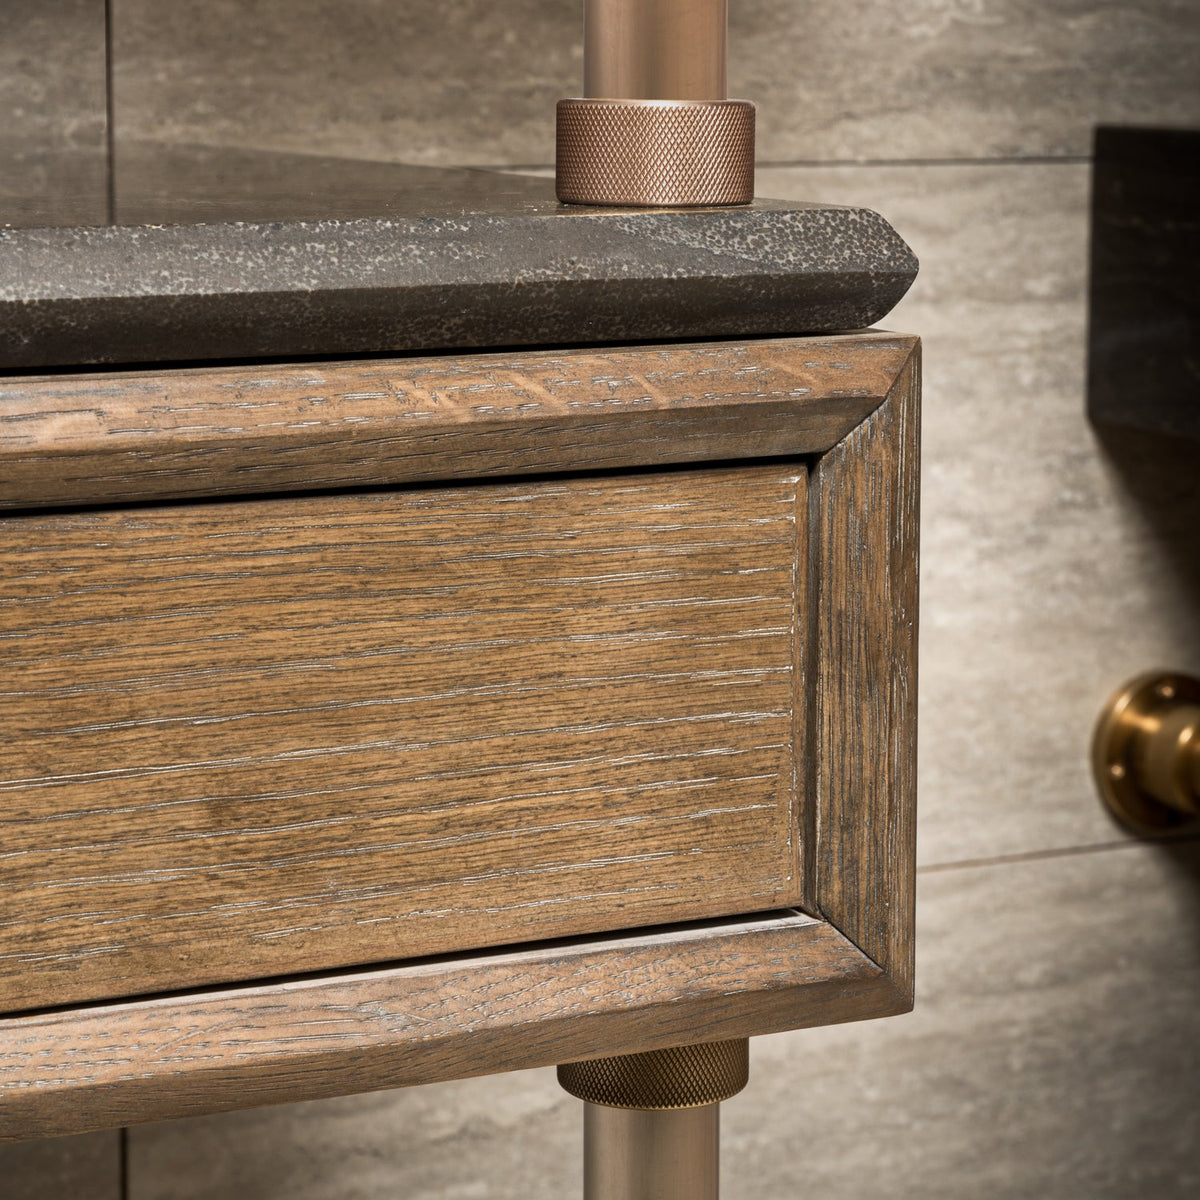 Stone Forest Elemental Classic detail of fittings, cement gray wood and antique gray limestone shelf image 3 of 4